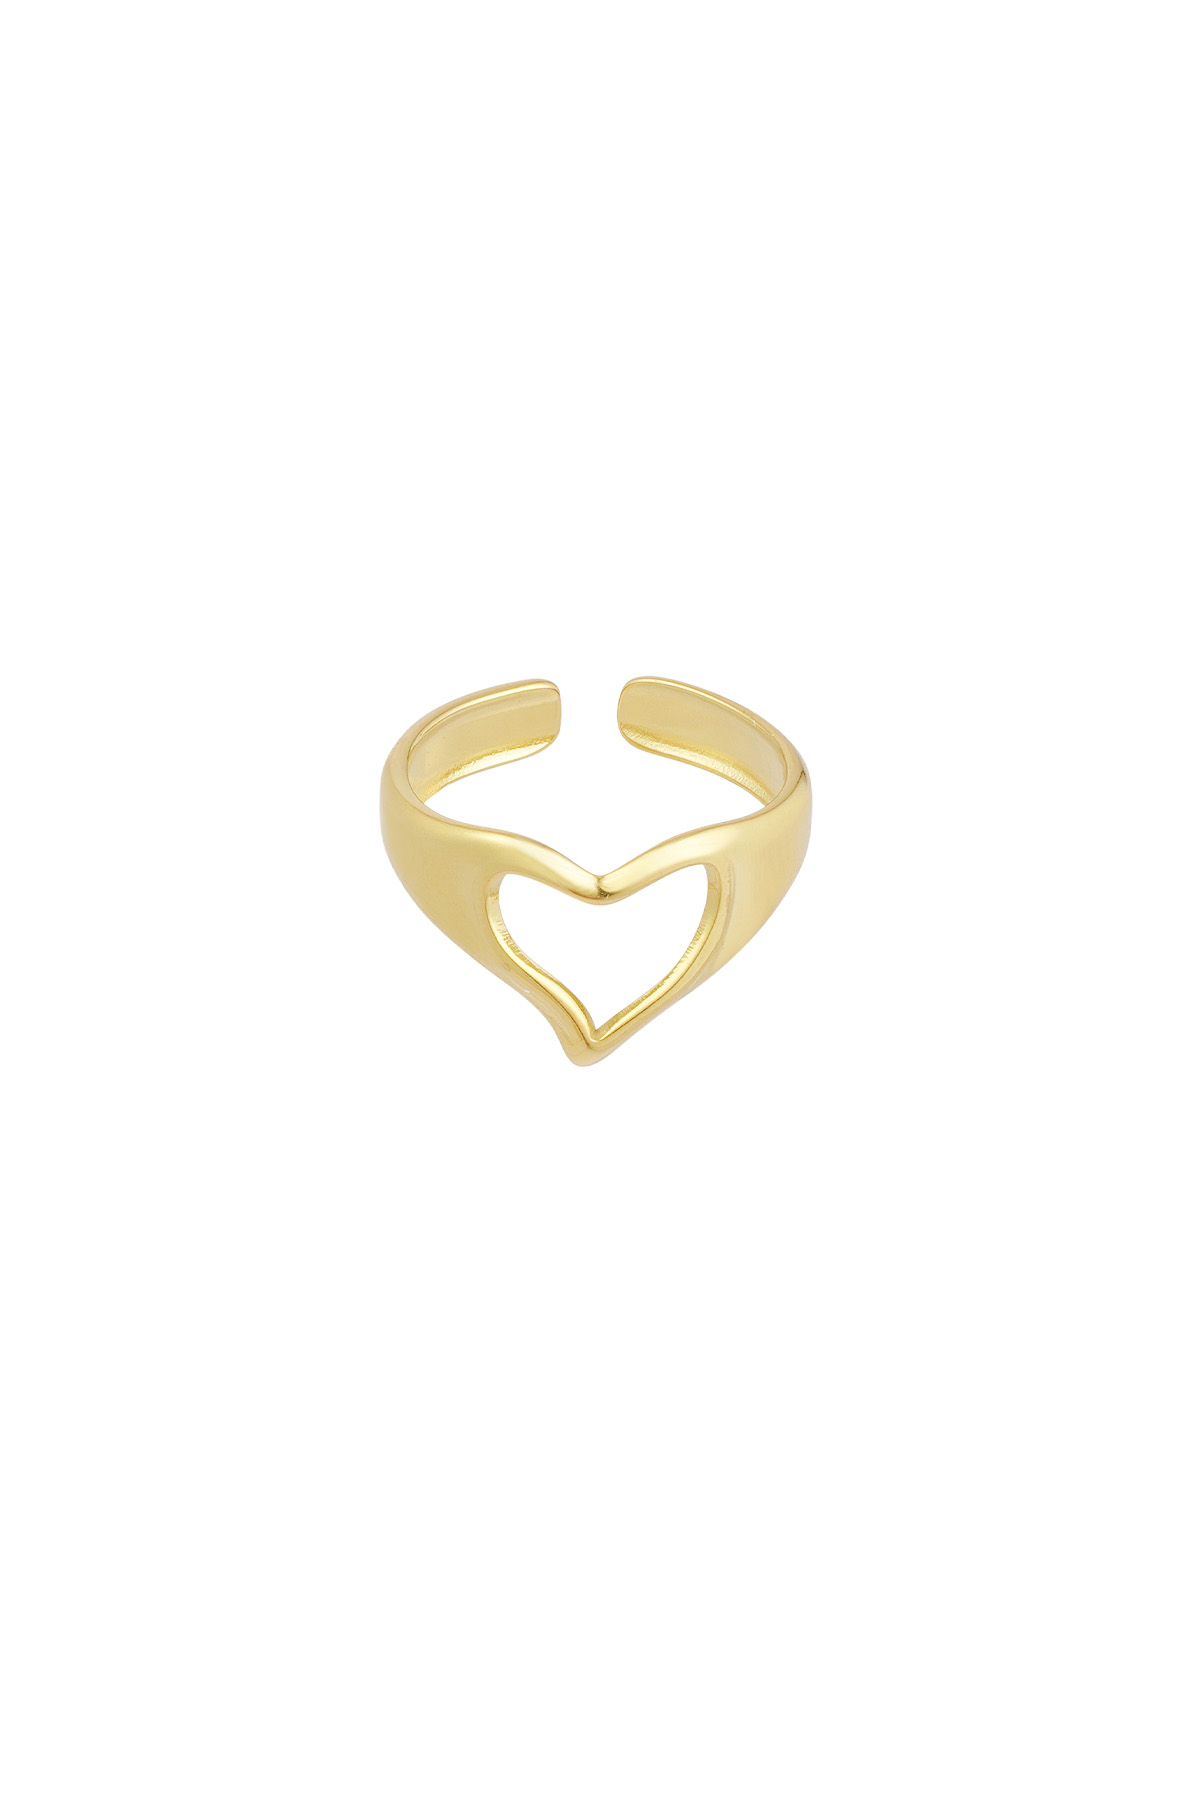 Ring love hands - gold